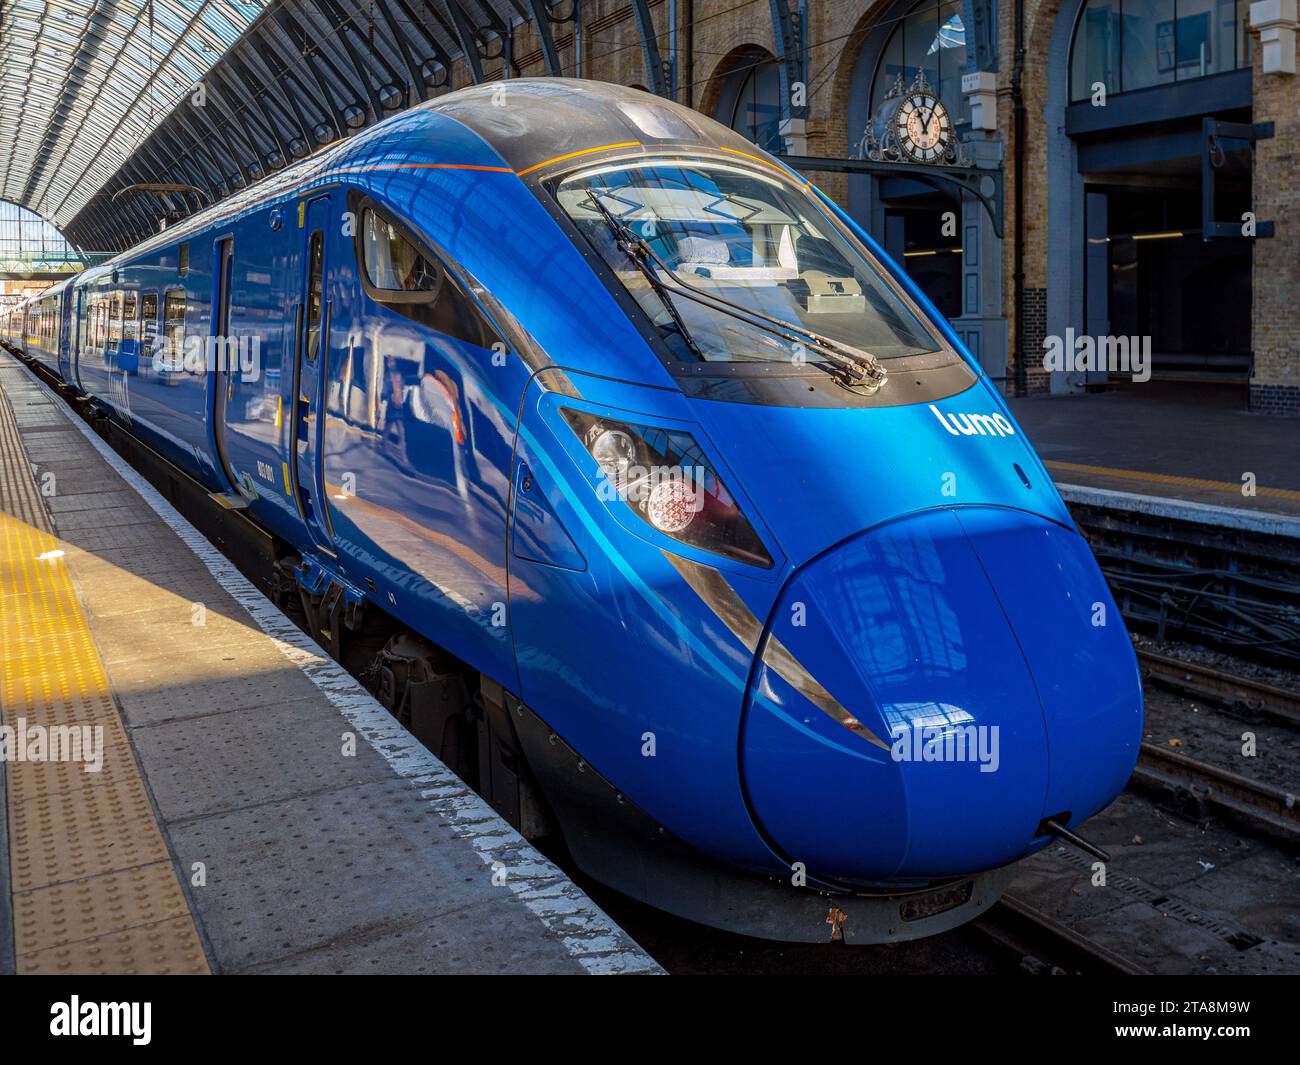 Lumo Train at London Kings Cross Station. Lumo is an open-access operator owned by FirstGroup. Lumo HQ is in Newcastle-upon-Tyne. Launched 2021. Stock Photo